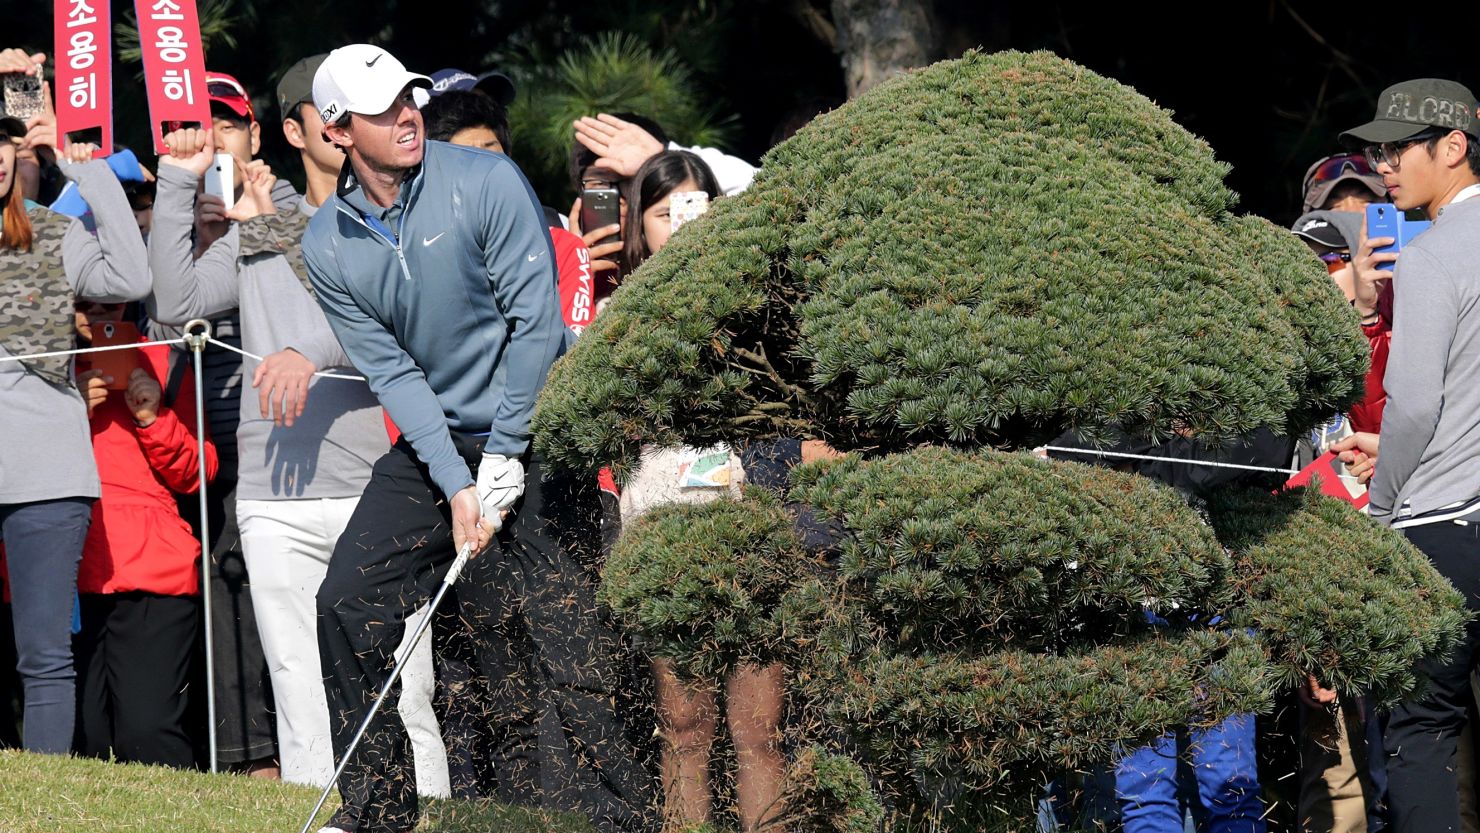 Rory McIlroy had a mixed day at the Korea Open but is still in contention entering the weekend. 